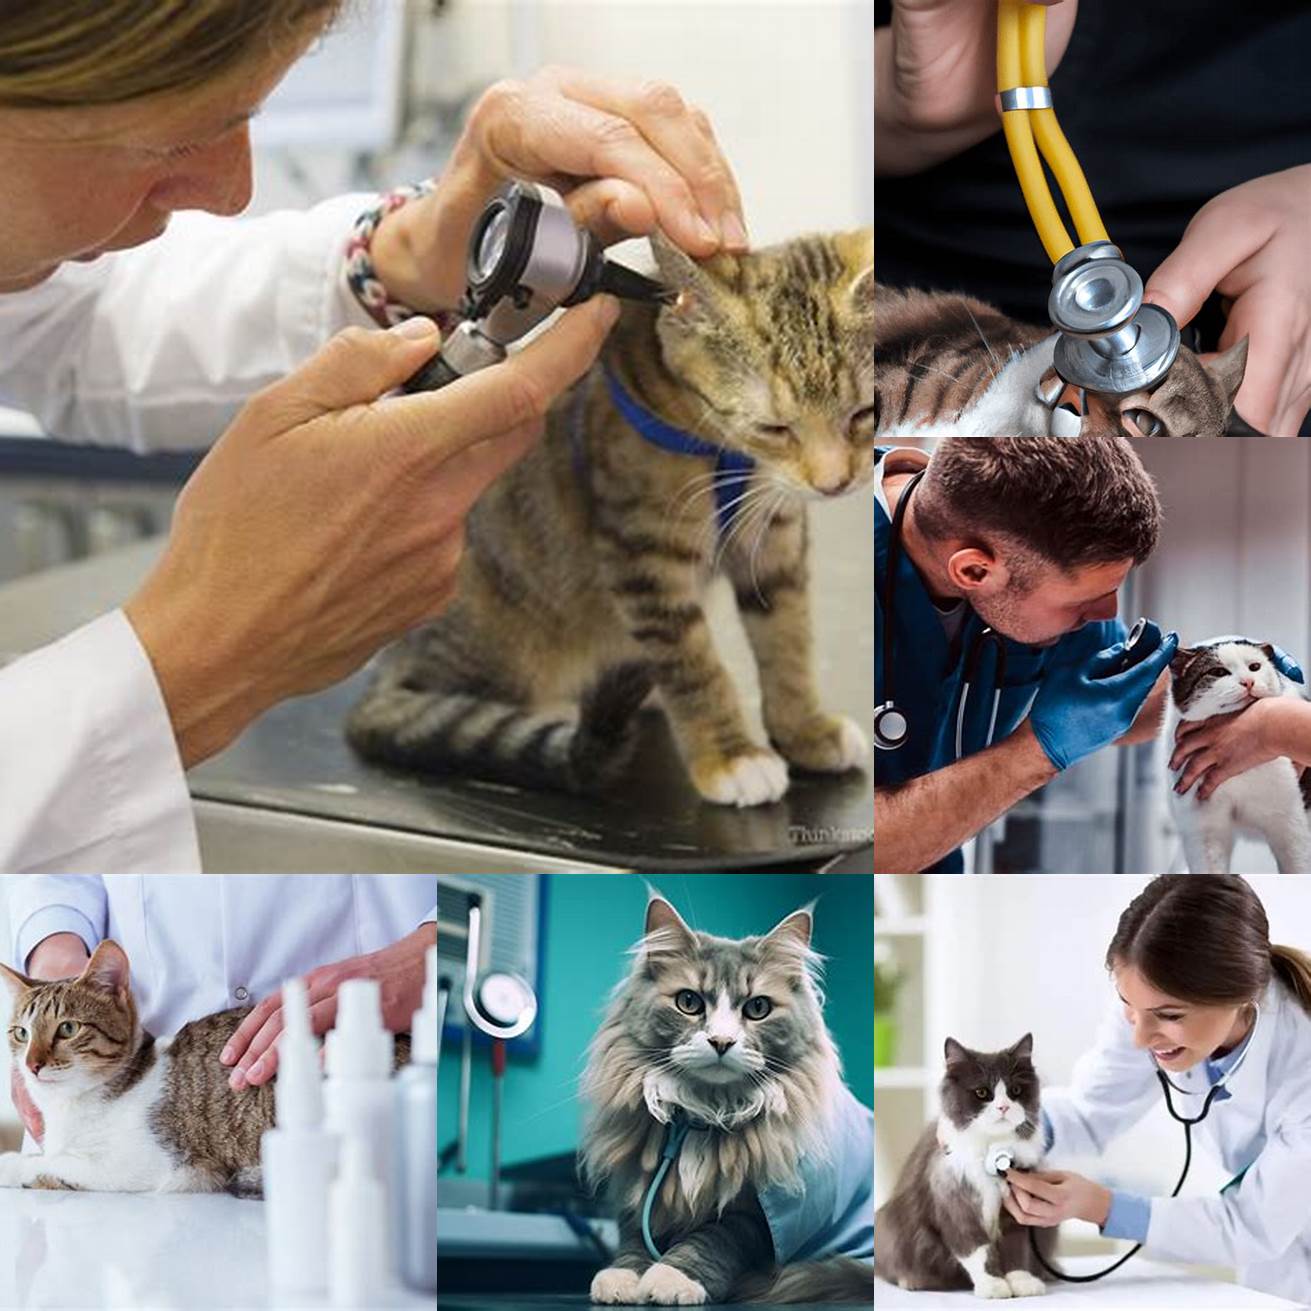 Regular Checkups Take your cat to the vet for regular checkups to ensure their eyes are healthy